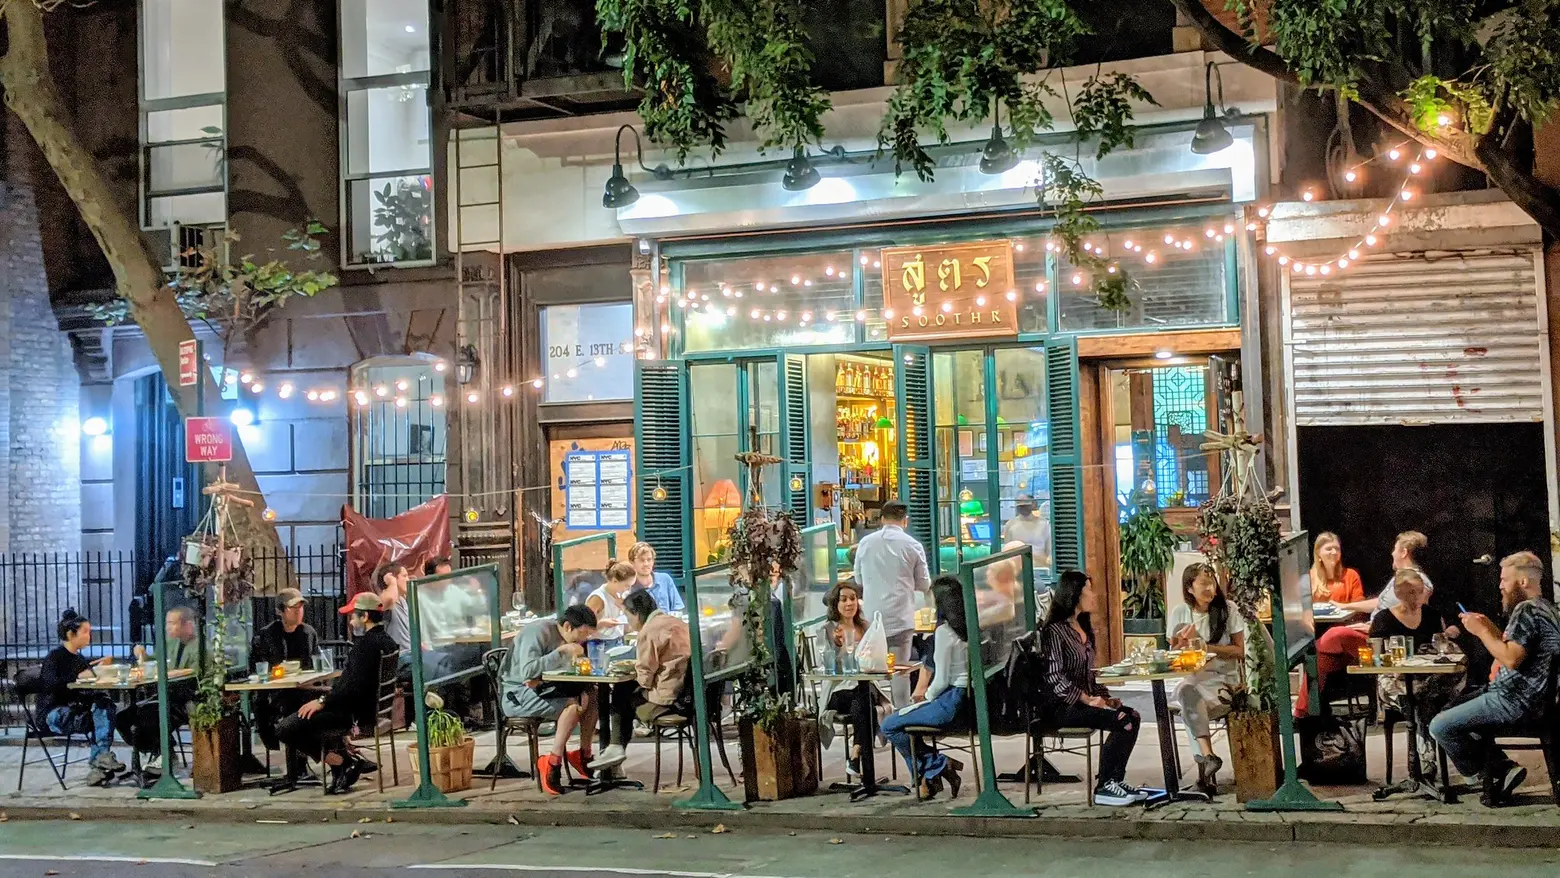 Indoor dining capacity in NYC can increase to 50% on March 19